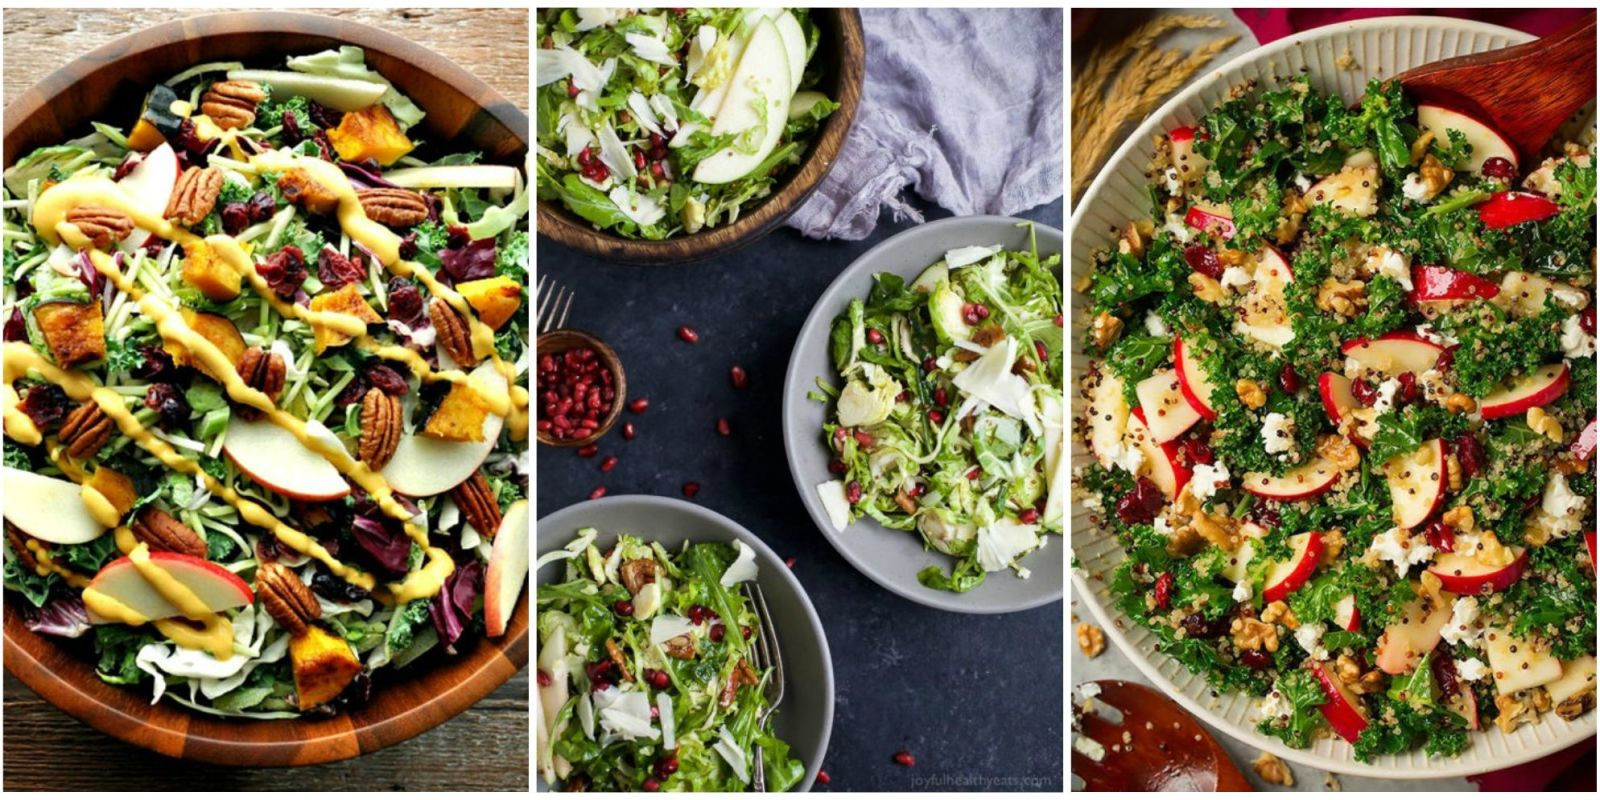 Salads For Thanksgiving
 11 Easy Thanksgiving Salad Recipes Best Side Salads for